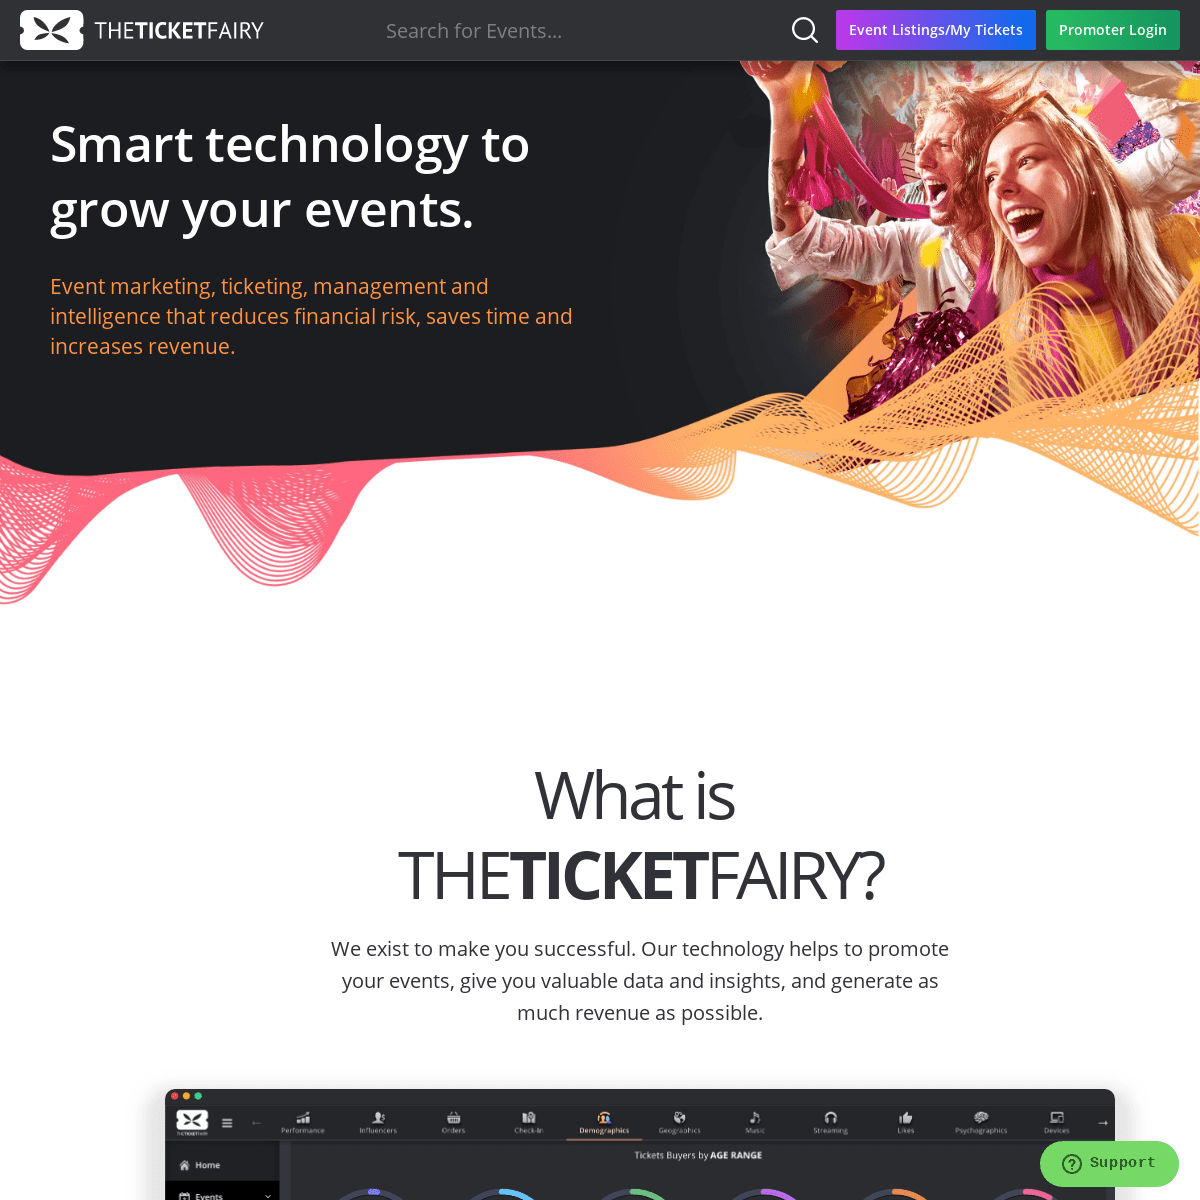 Upgrade to The Ticket Fairy